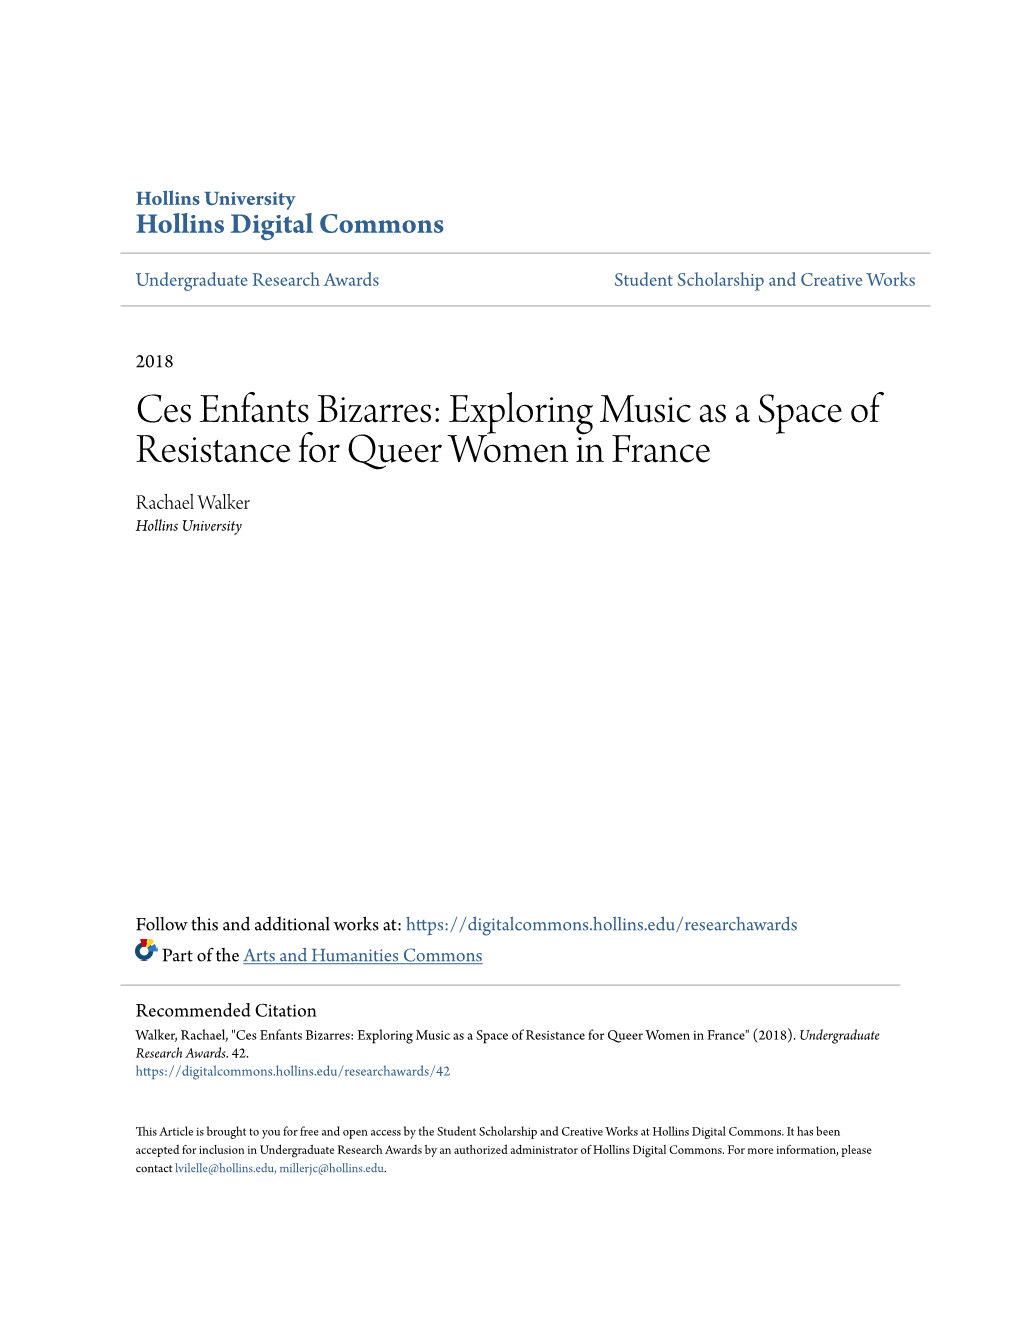 Exploring Music As a Space of Resistance for Queer Women in France Rachael Walker Hollins University